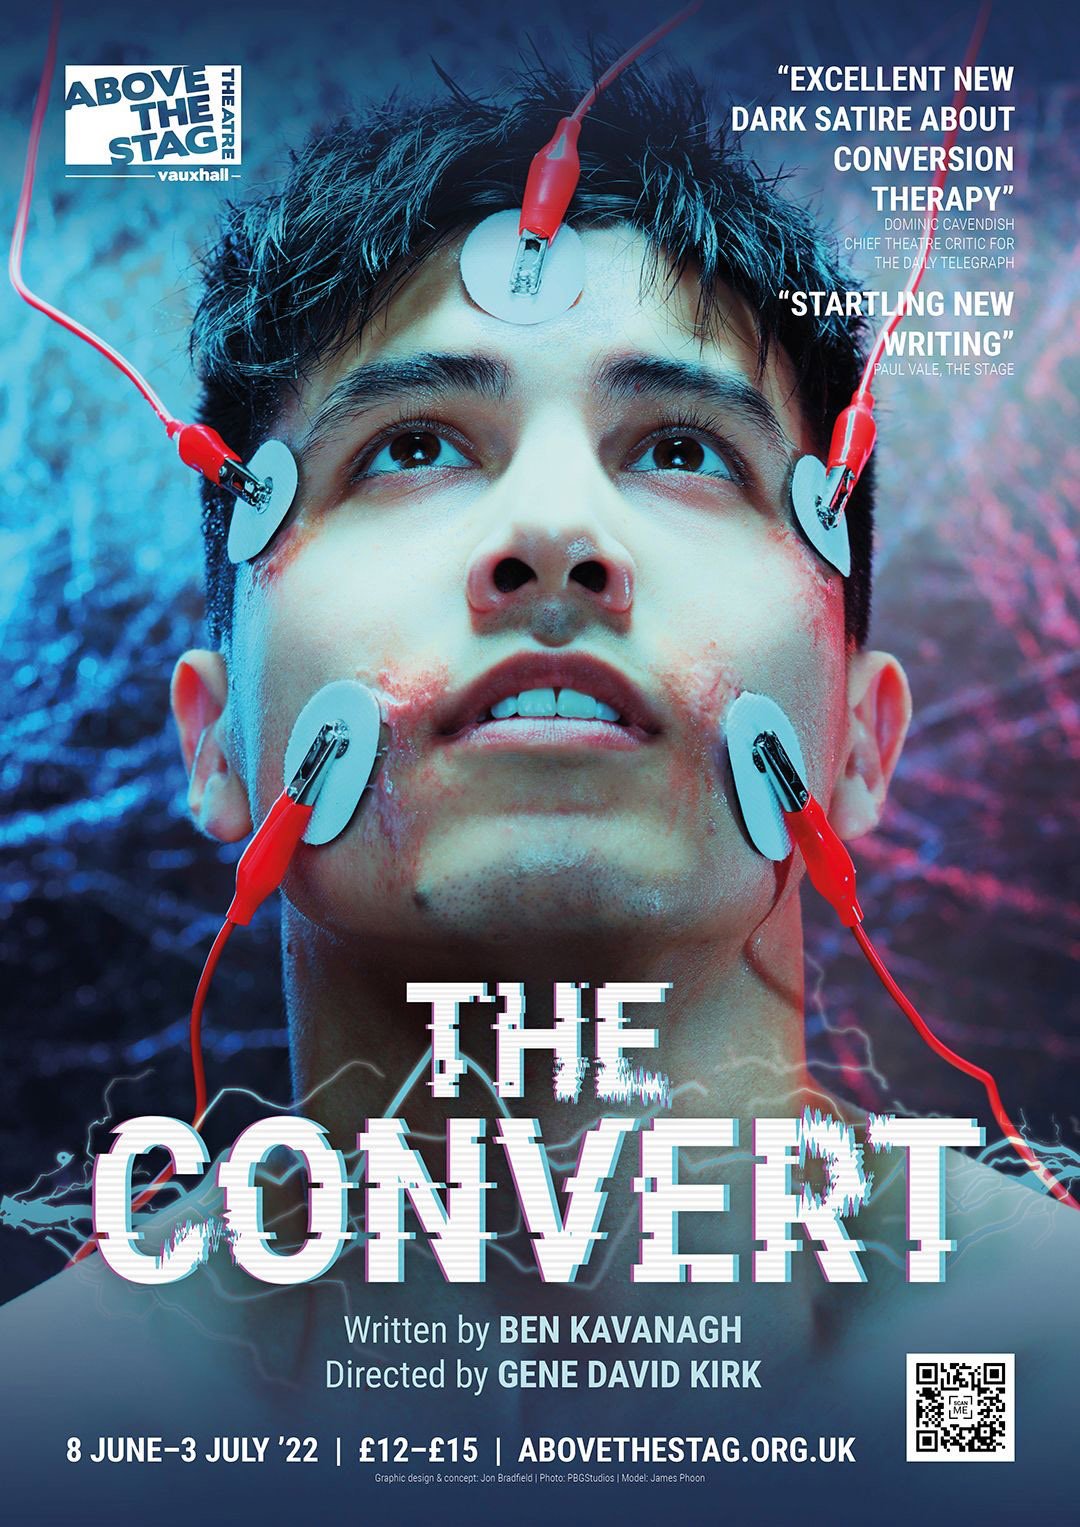 Promo image for The Convert by Ben Kavanagh